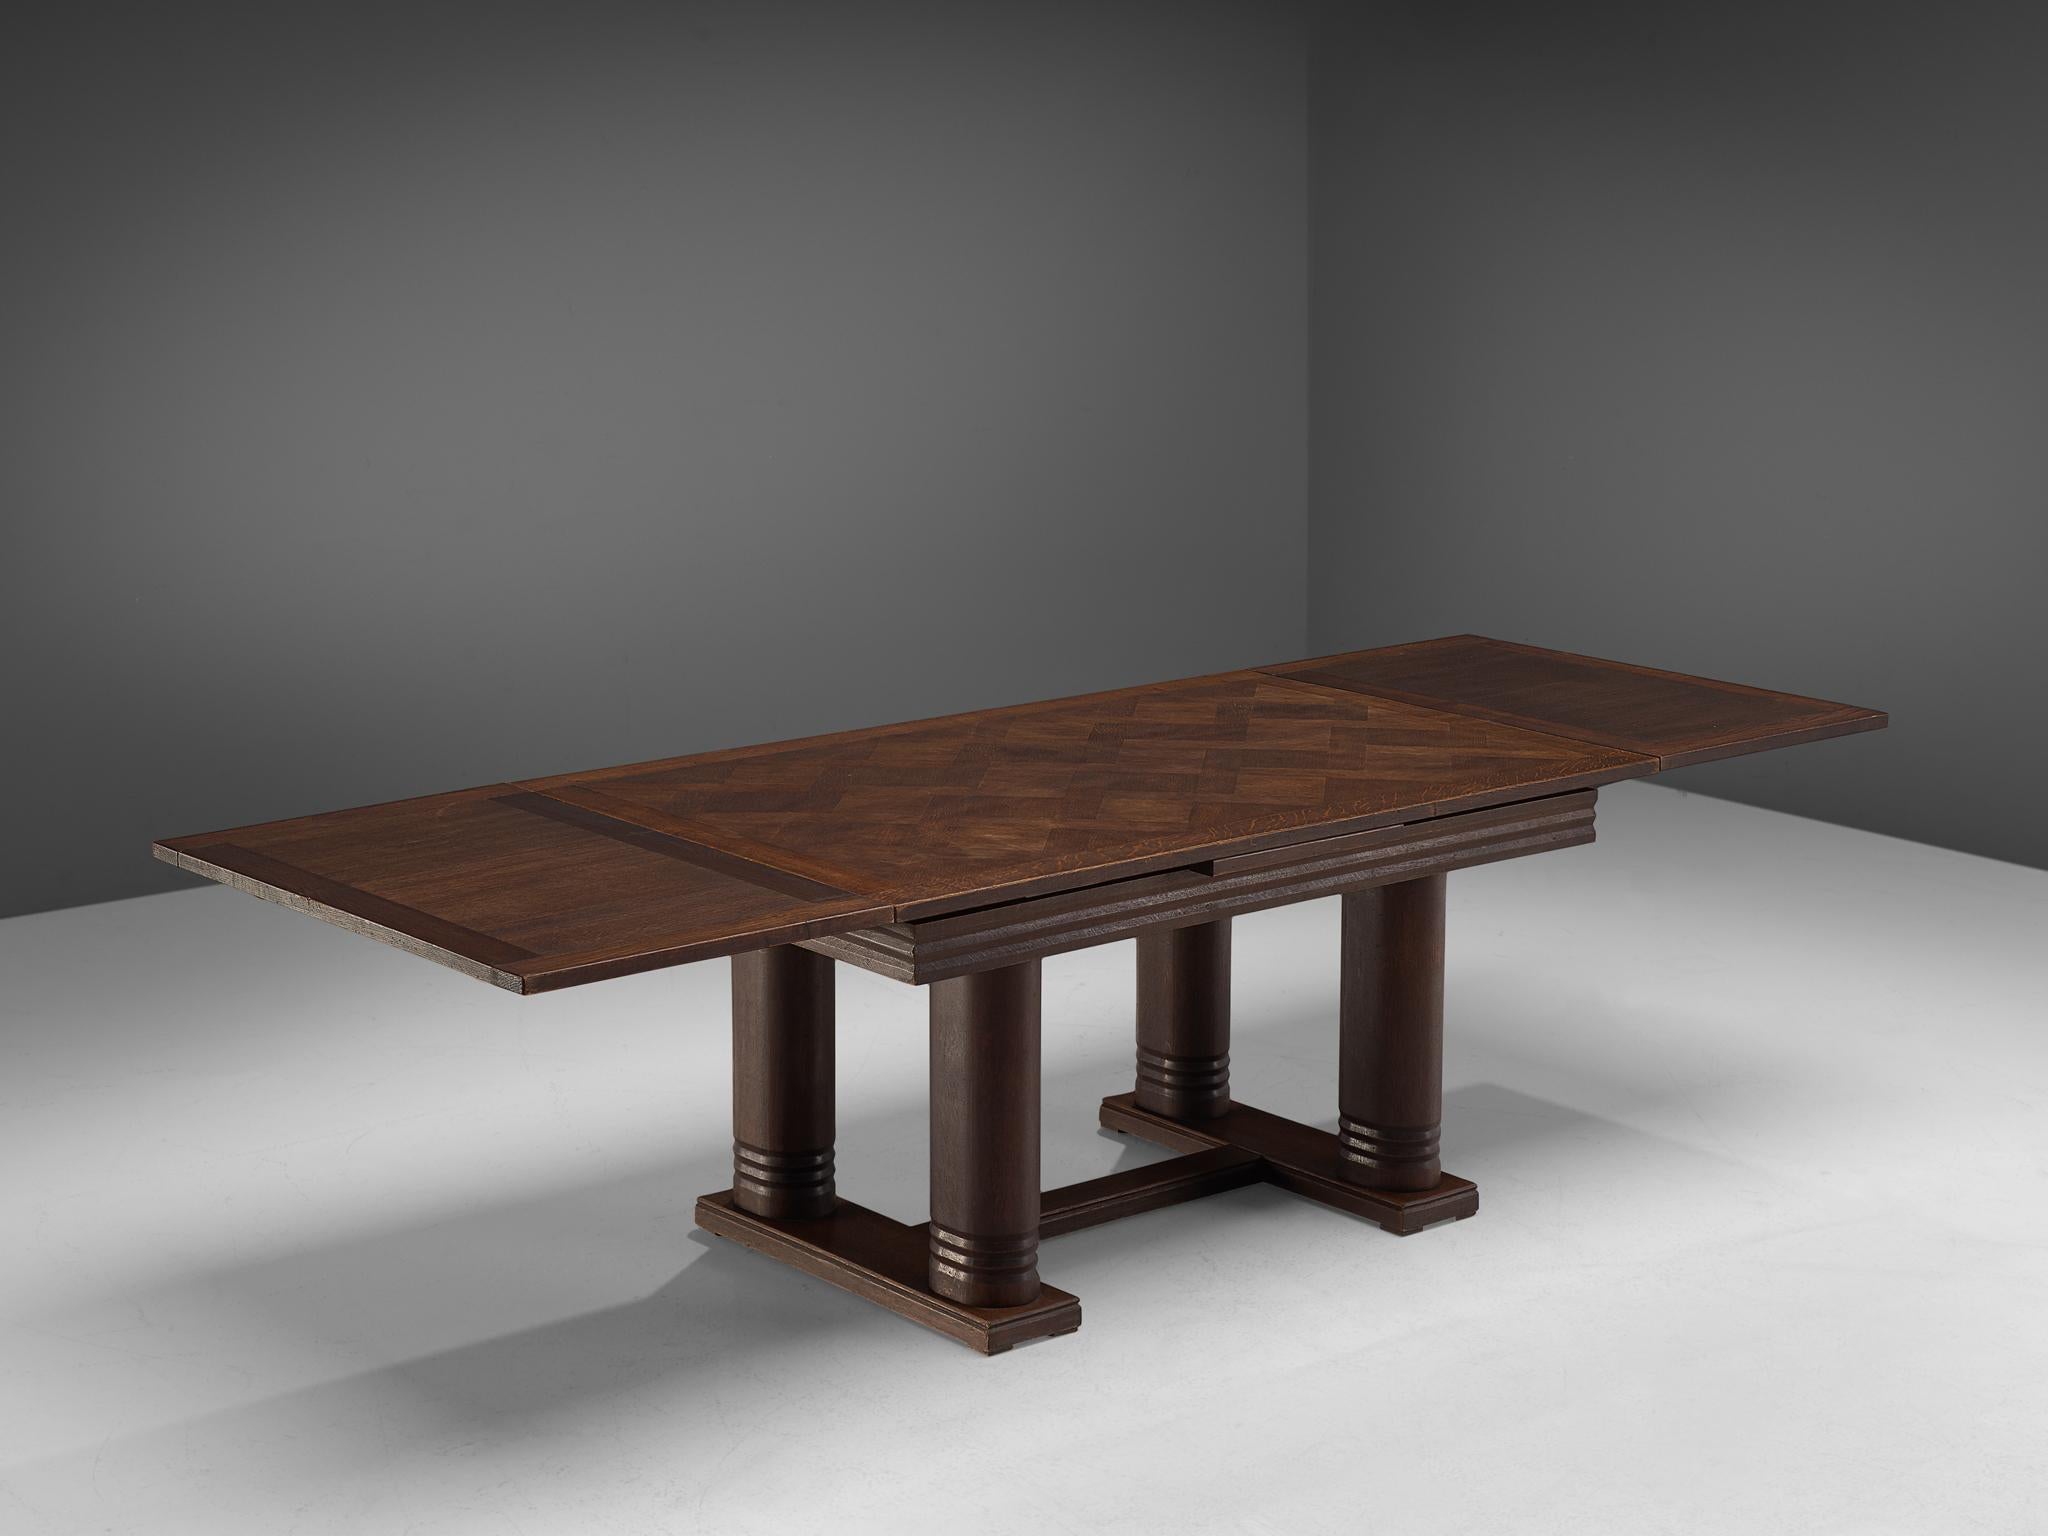 Charles Dudouyt, dining table, oak, France, 1940s.

This Art Deco table shows the great craftsmanship of Charles Dudouyt. The tabletop in inlayed with different pieces of wood, creating a beautiful pattern thanks to the different drawings. The base